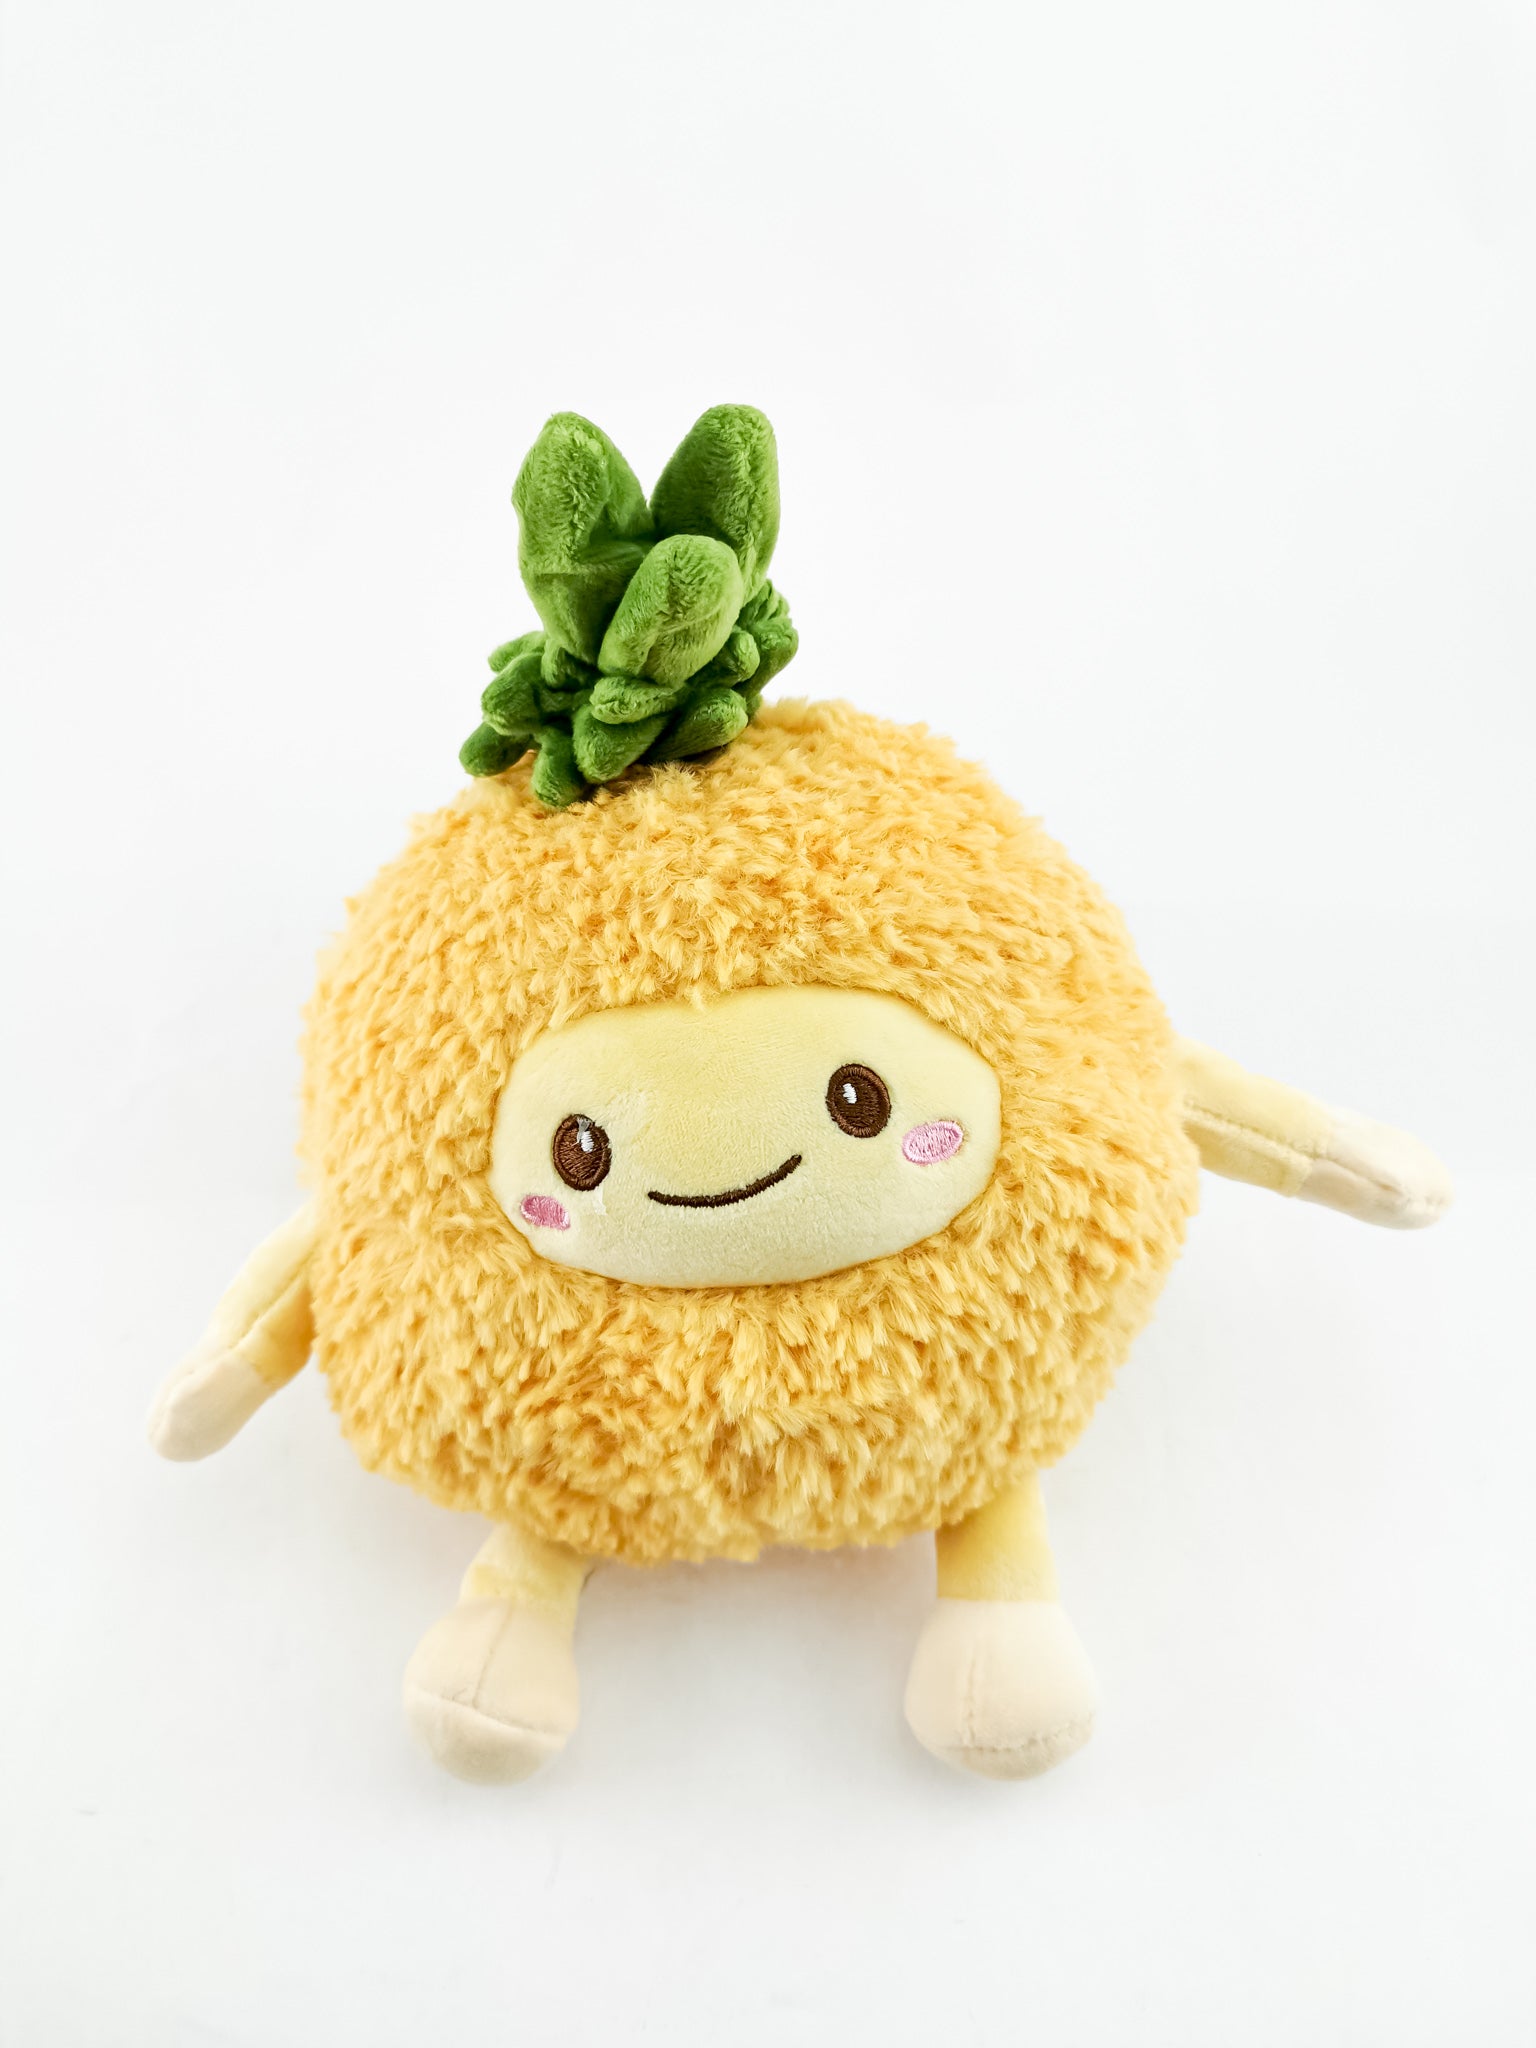 Fruit Plush Toy/ Pillow - Pineapple - Gifts by Art Tree